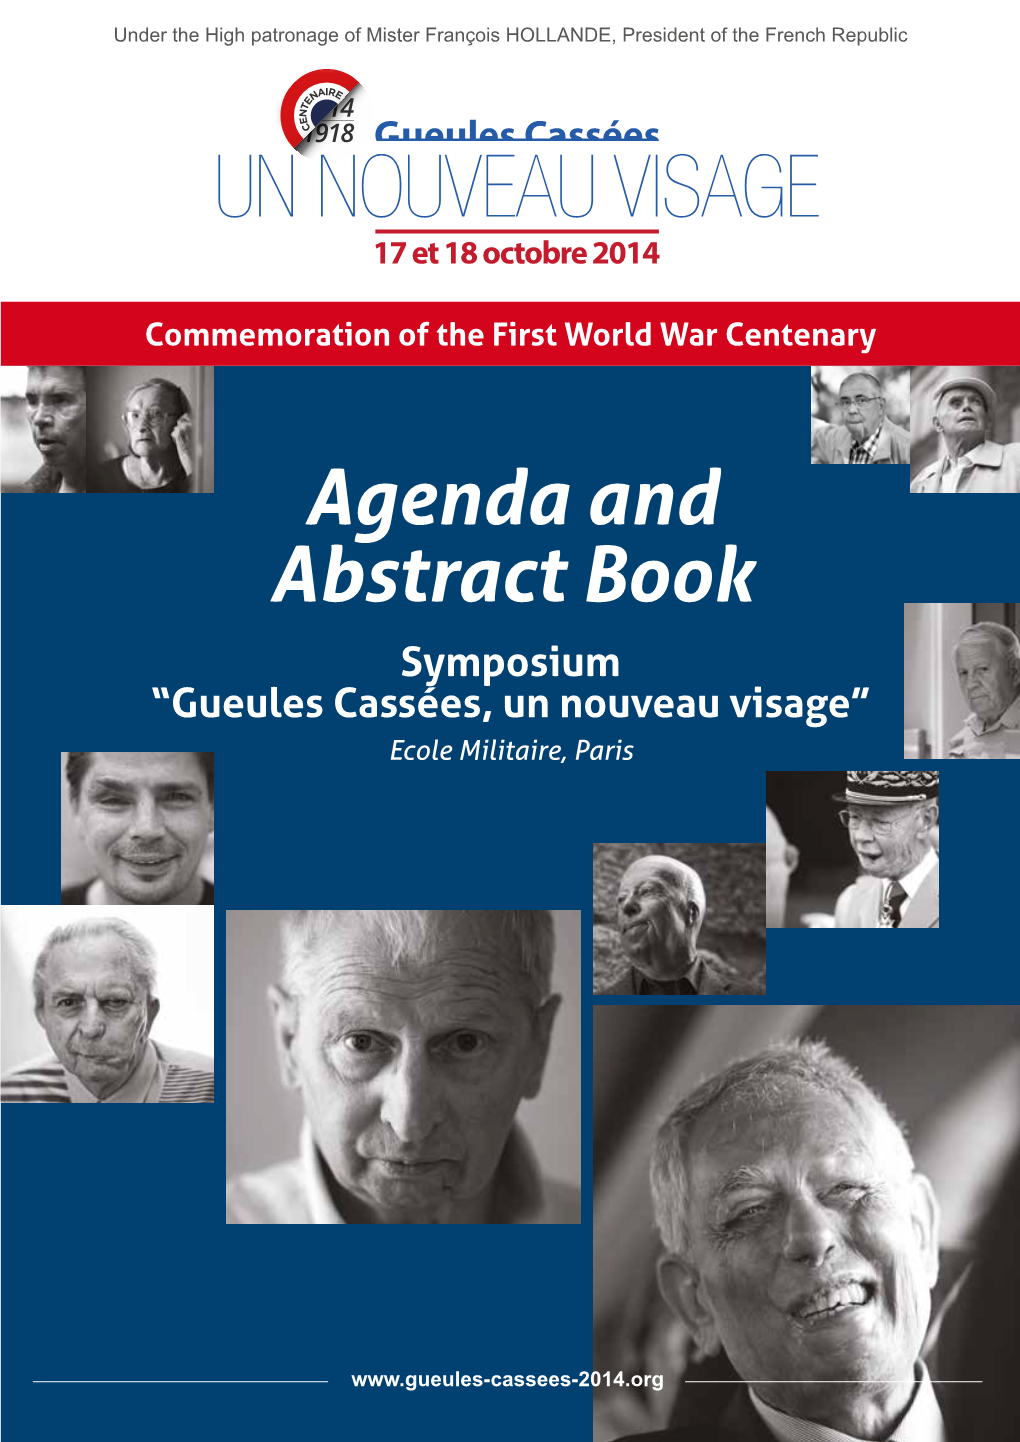 Agenda and Abstract Book